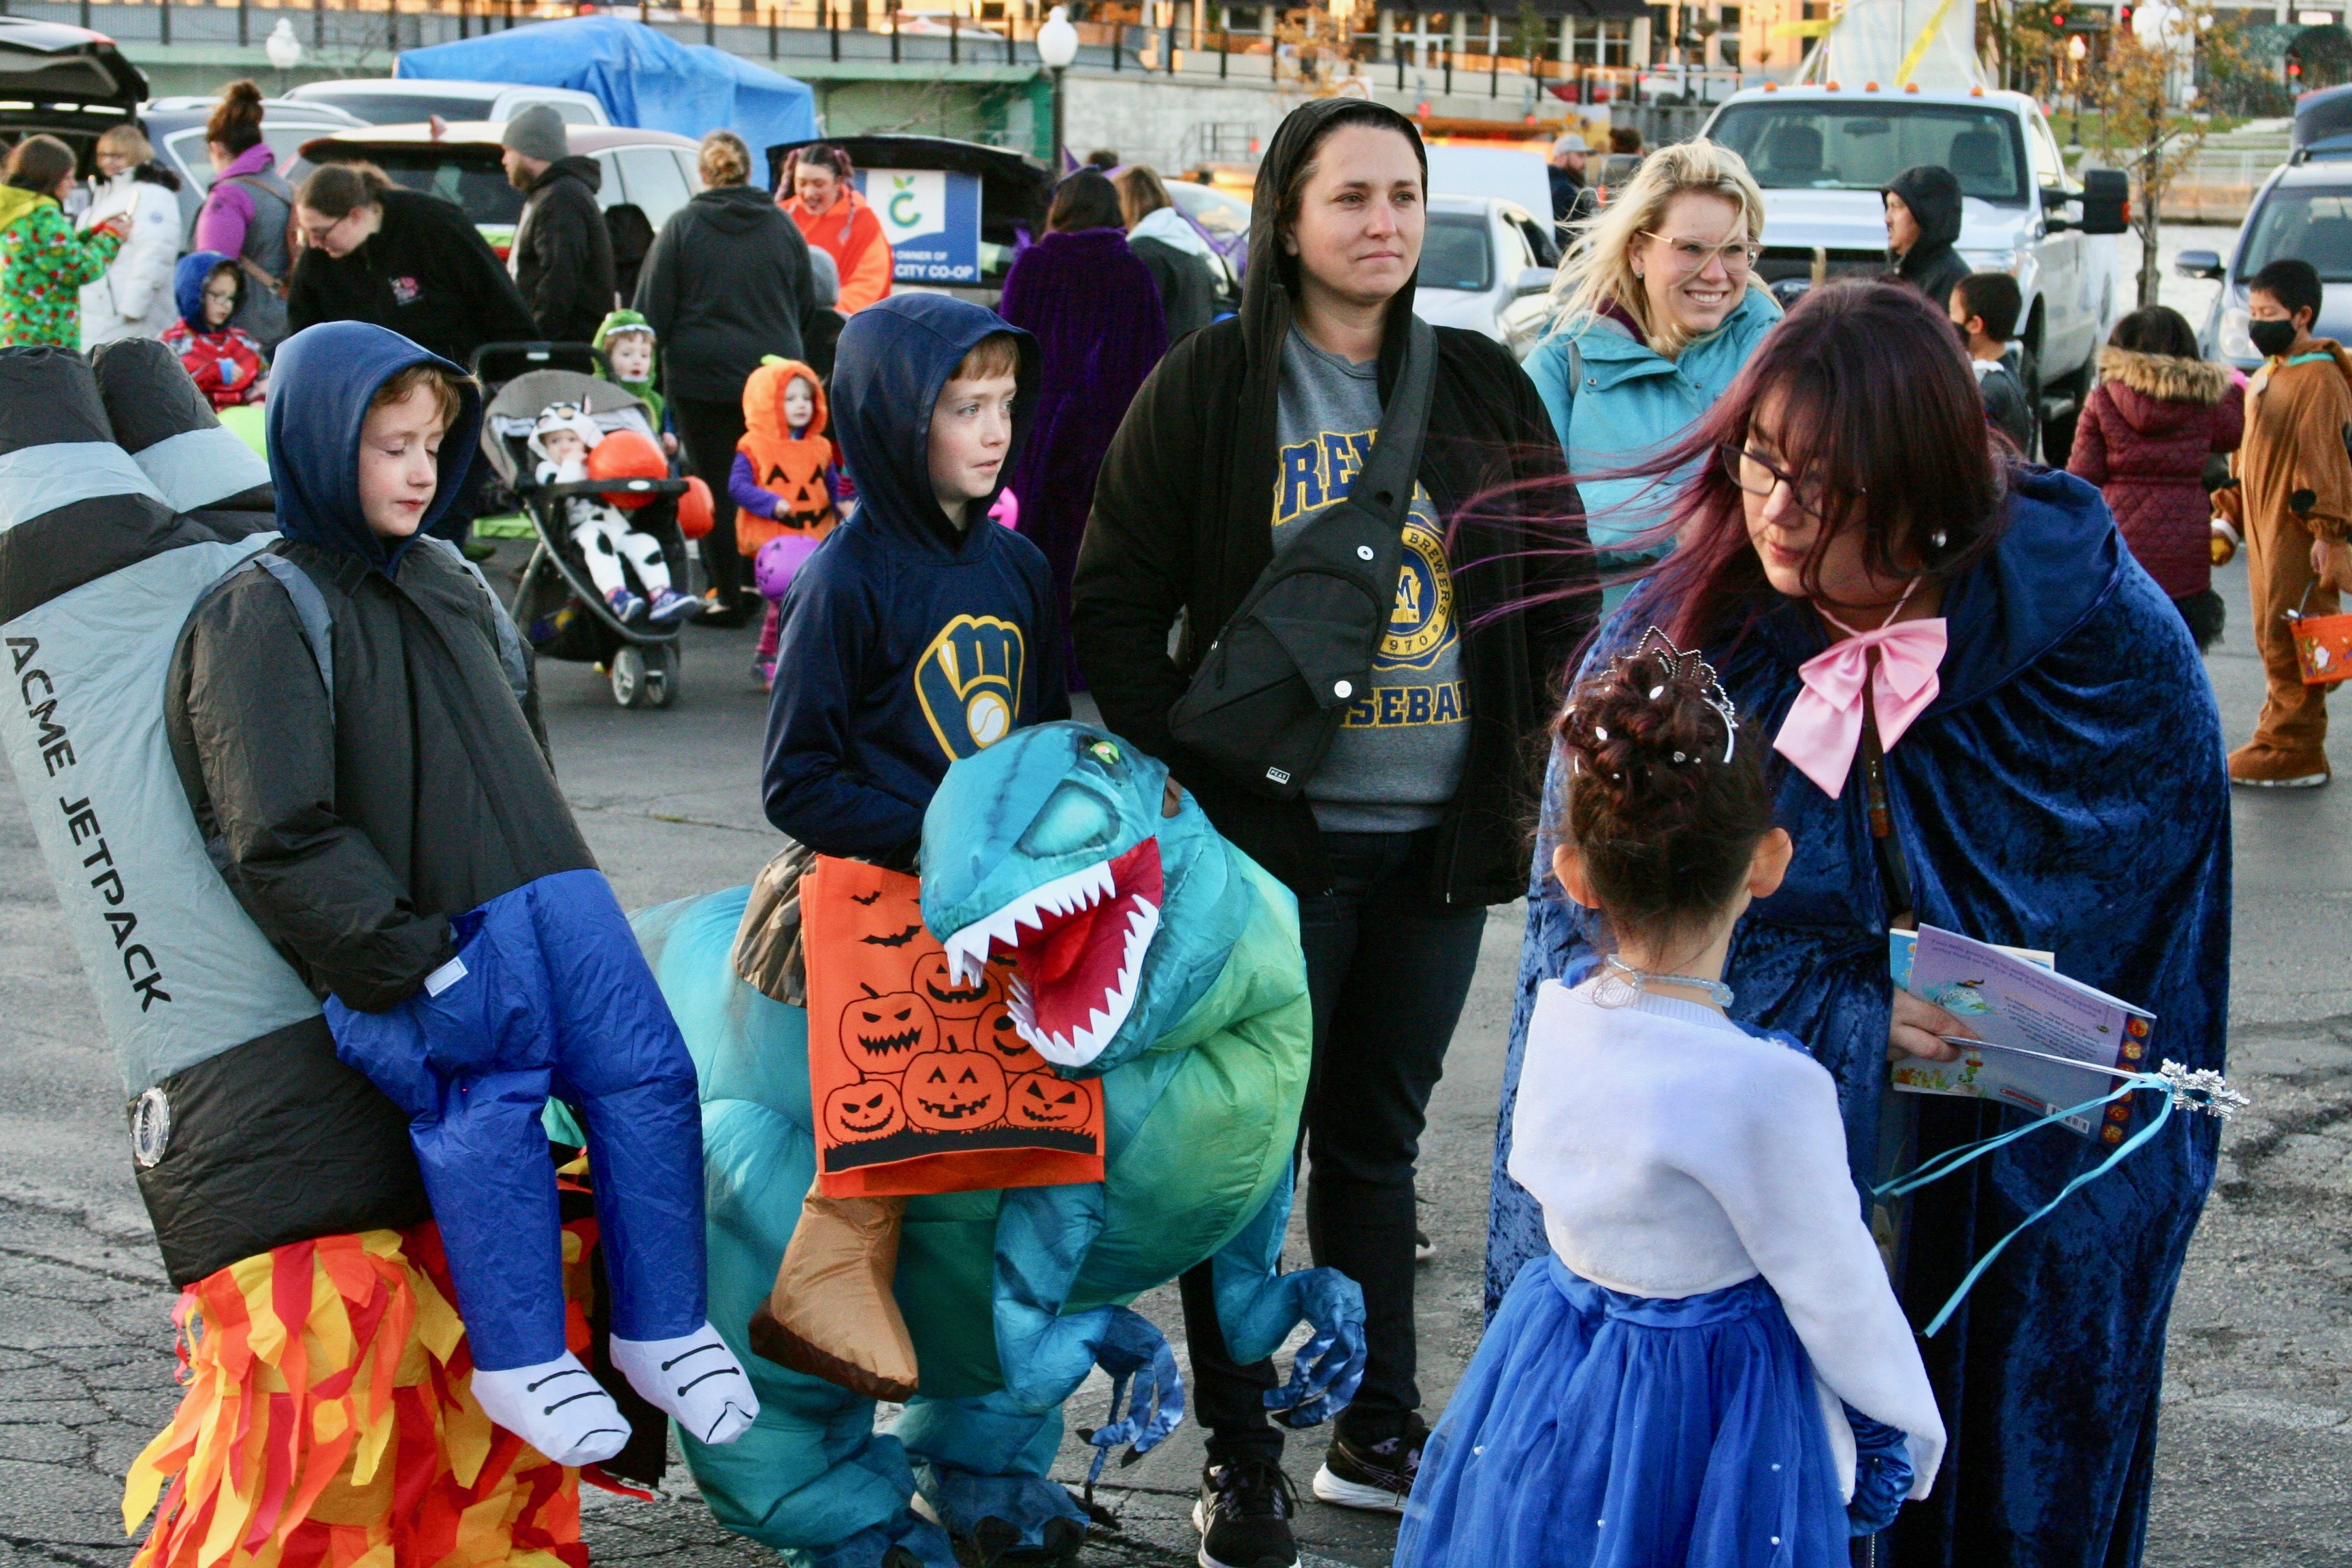 Participants at trunk or treat event